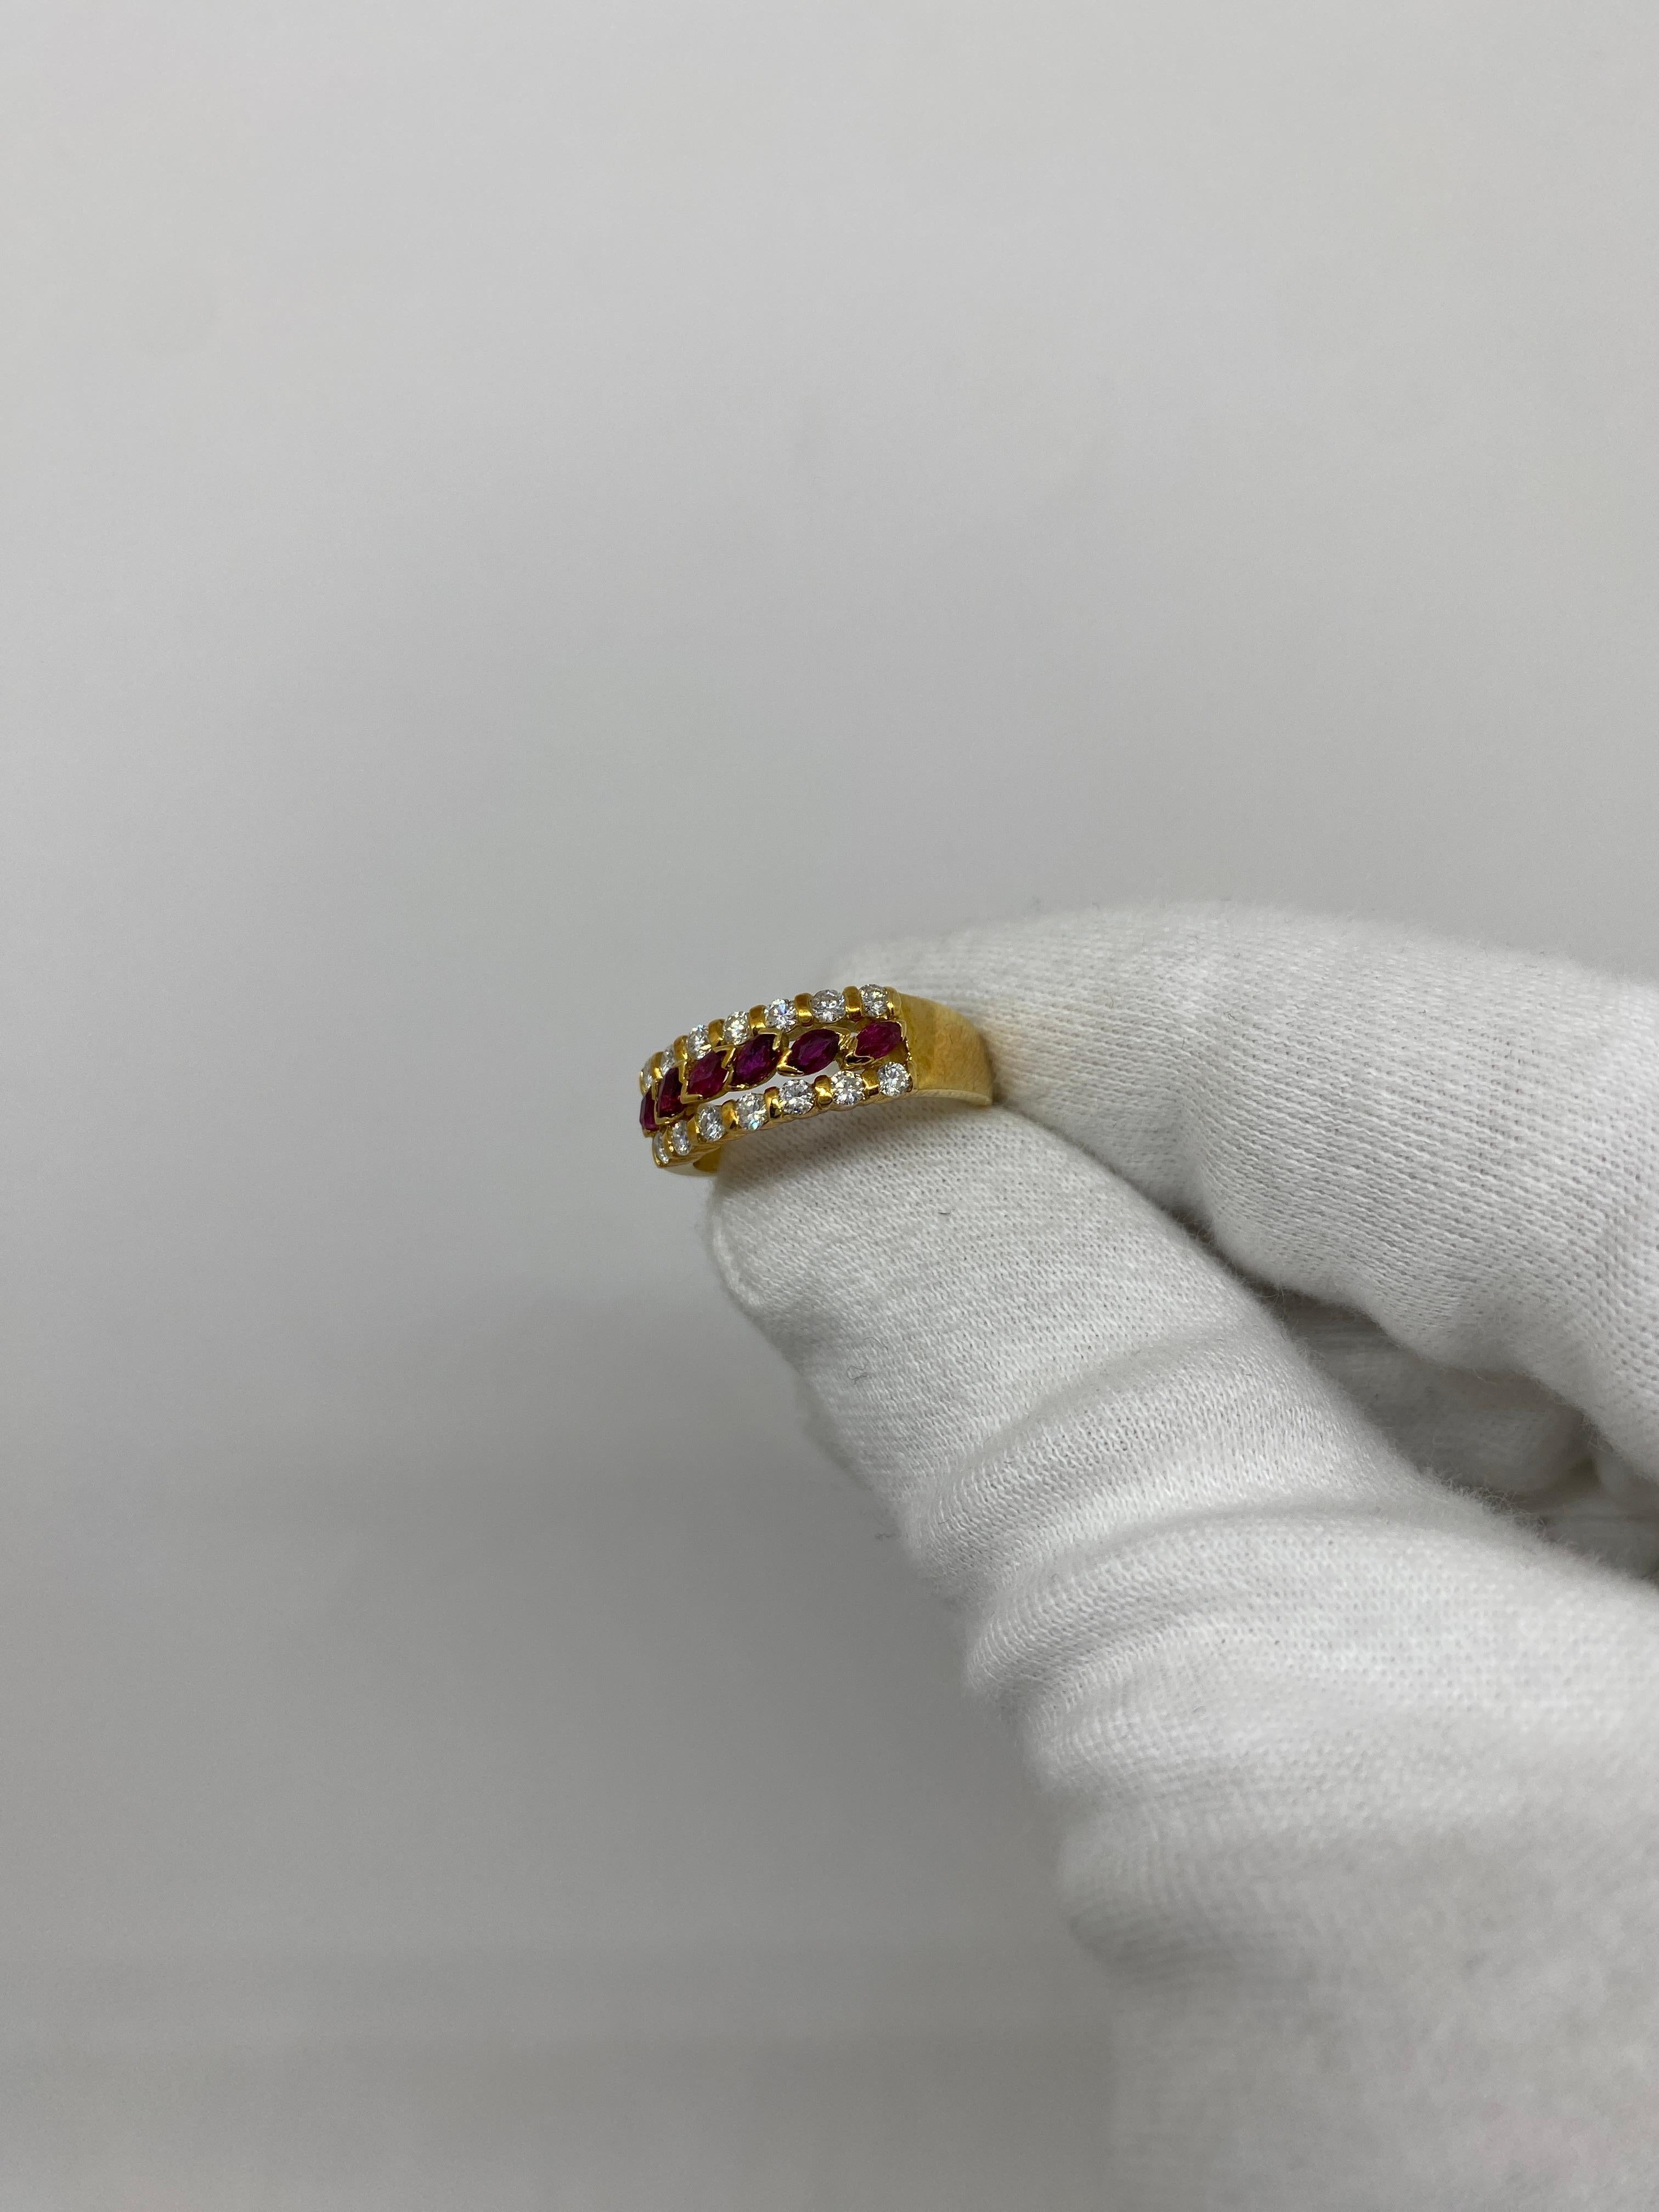 Ring made of 18kt yellow gold with navette-cut rubies for ct.0.50 and natural white brilliant-cut diamonds for ct.0.45

Welcome to our jewelry collection, where every piece tells a story of timeless elegance and unparalleled craftsmanship. As a